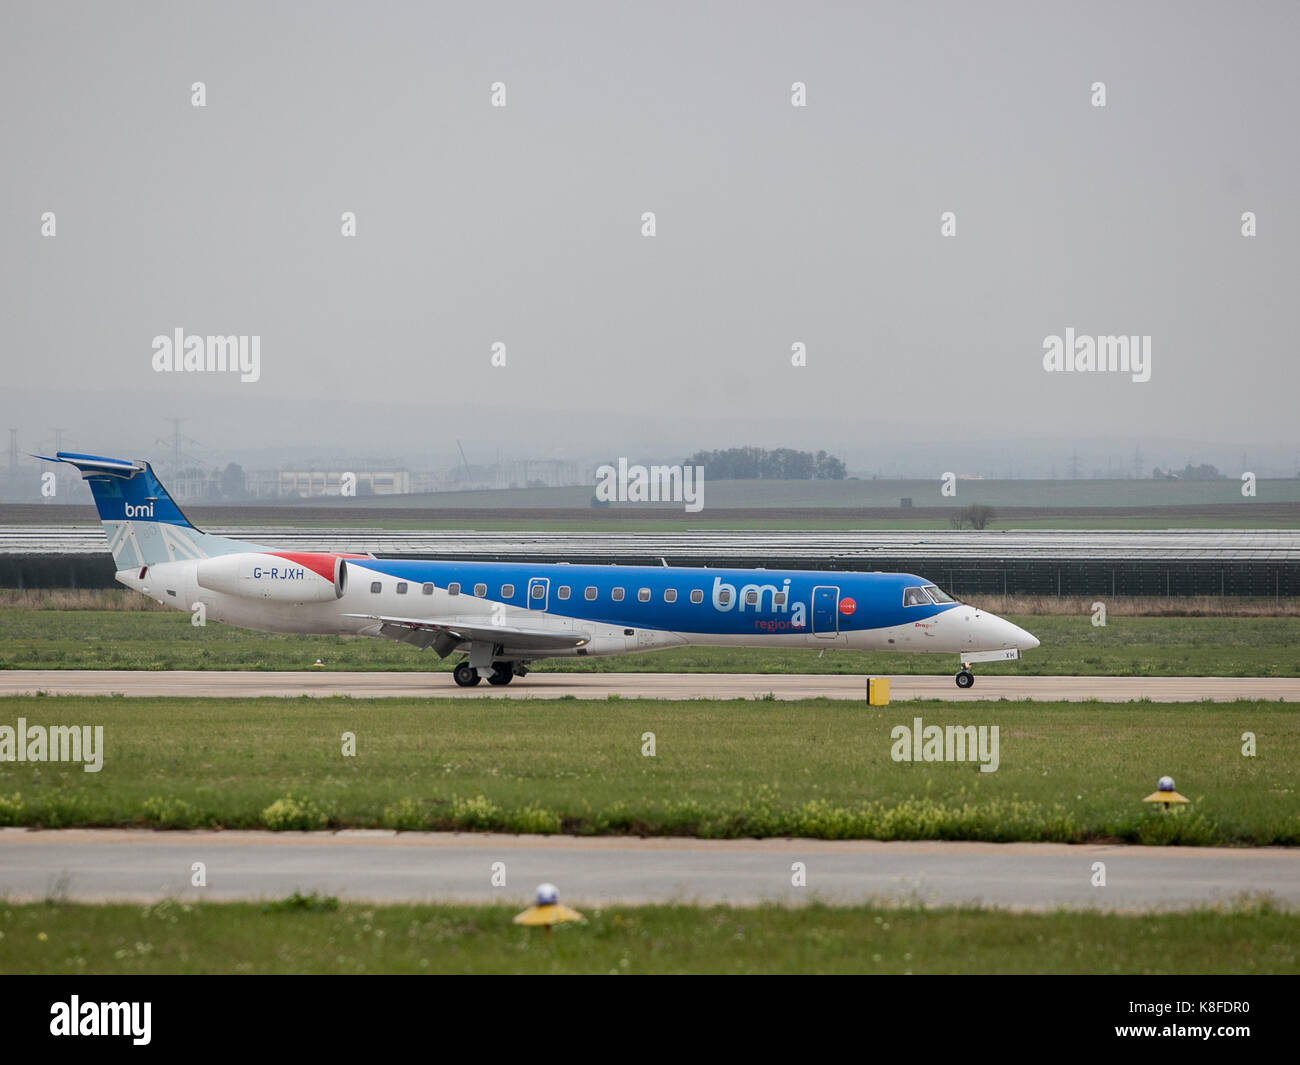 Fly Bmi Stock Photos Fly Bmi Stock Images Alamy